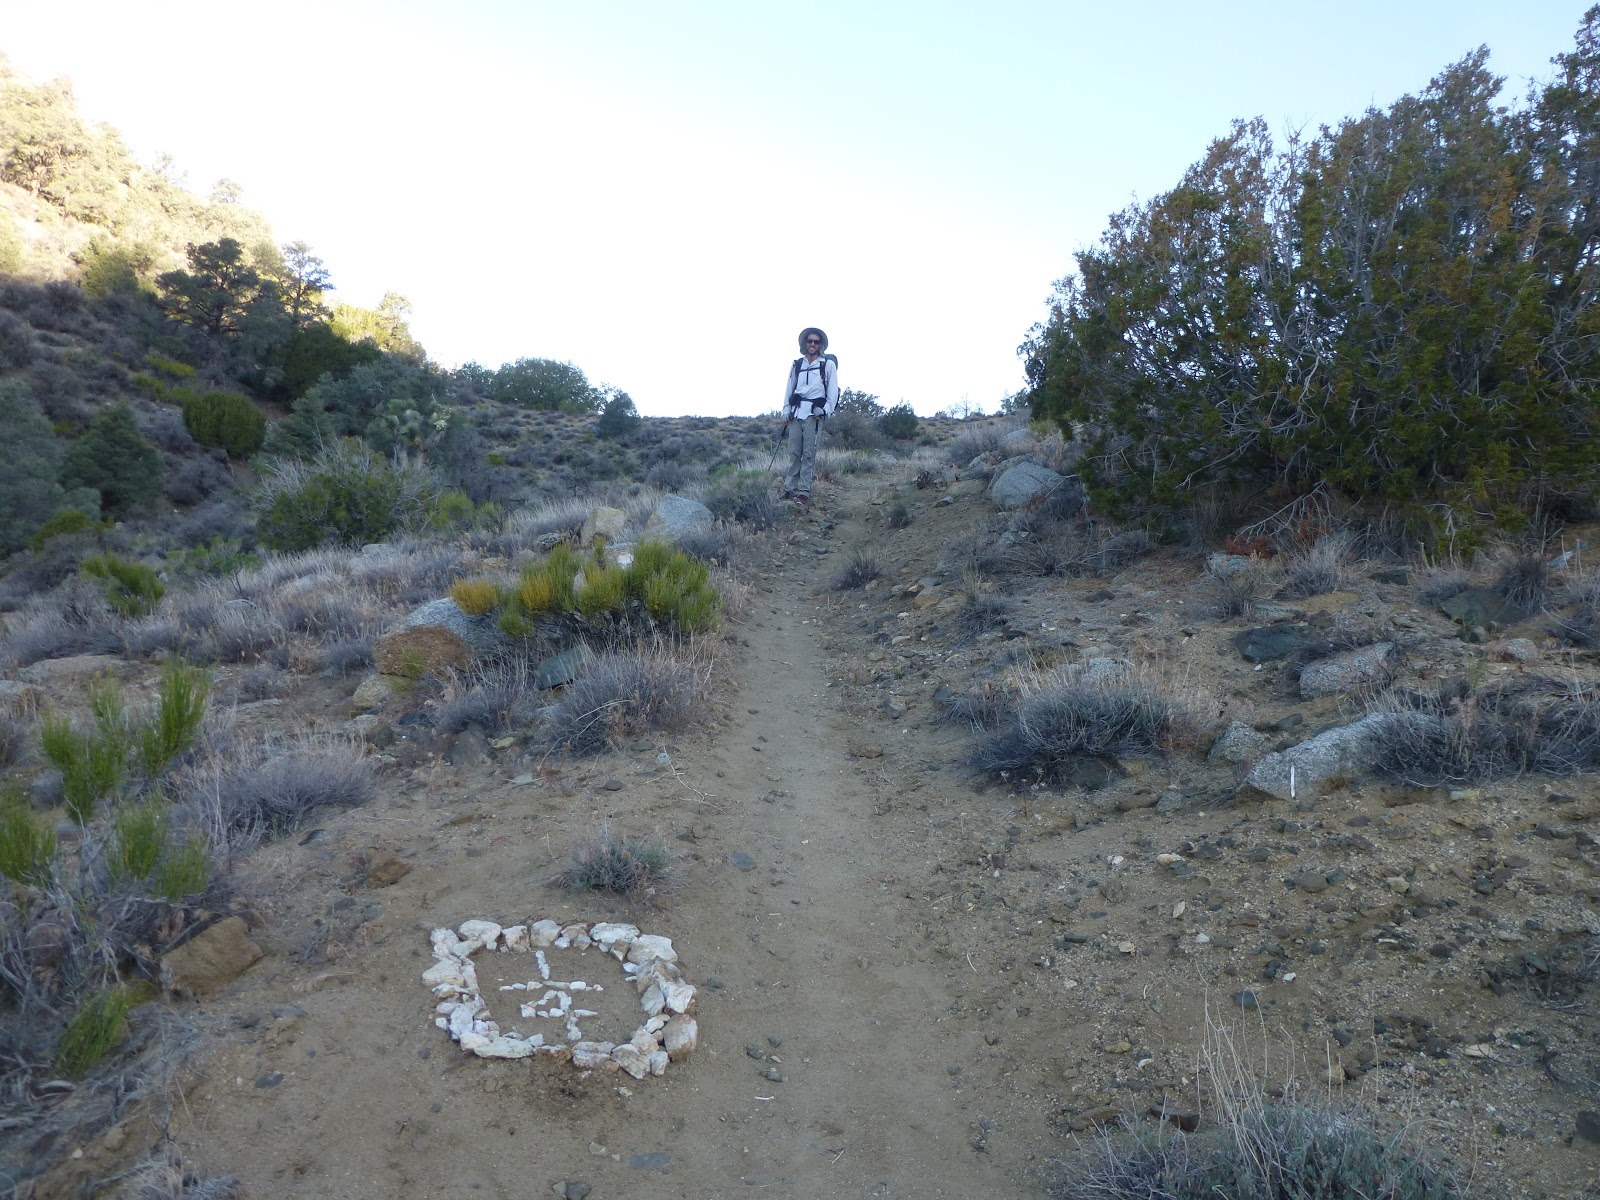 Crossing the ¼ trail mile mark